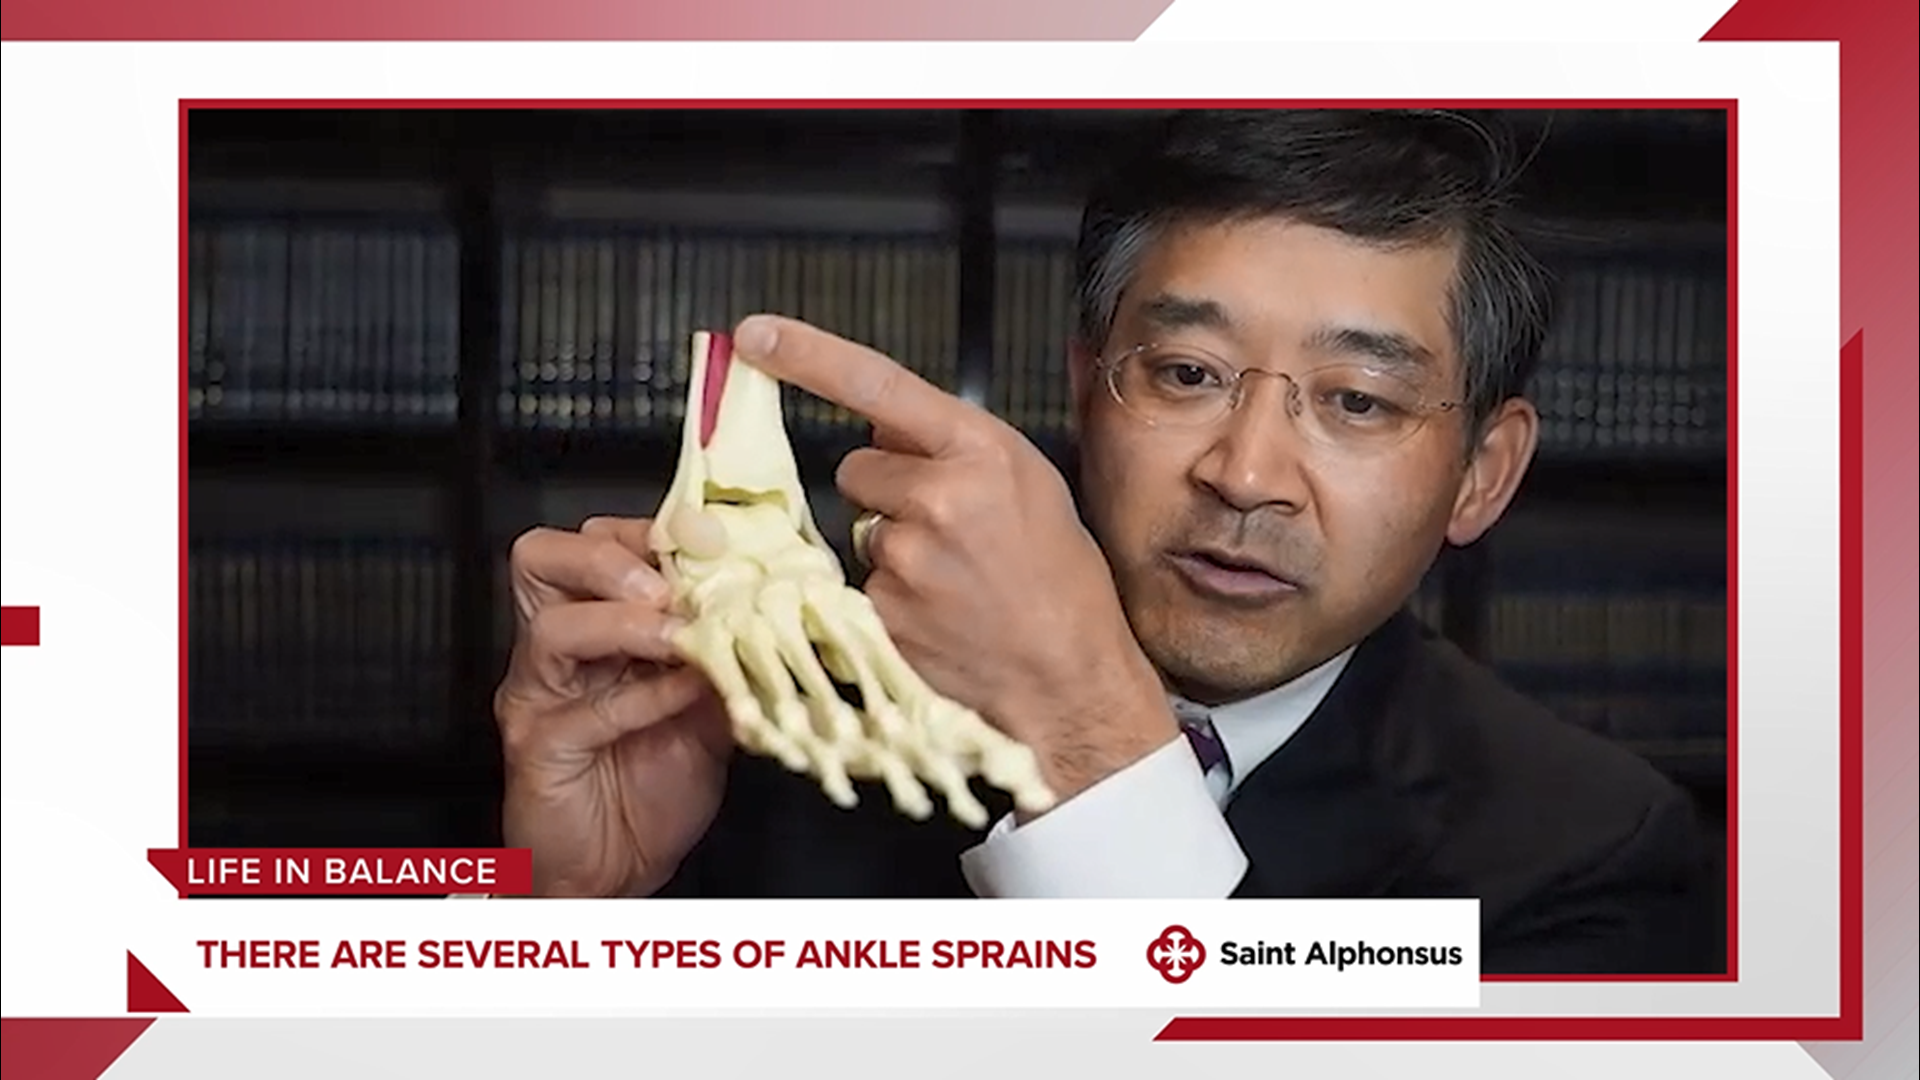 Orthopaedic surgeon Dr. Christopher Hirose MD with Saint Alphonsus shares how to avoid ankle injuries and what to do if you do injure yourself.